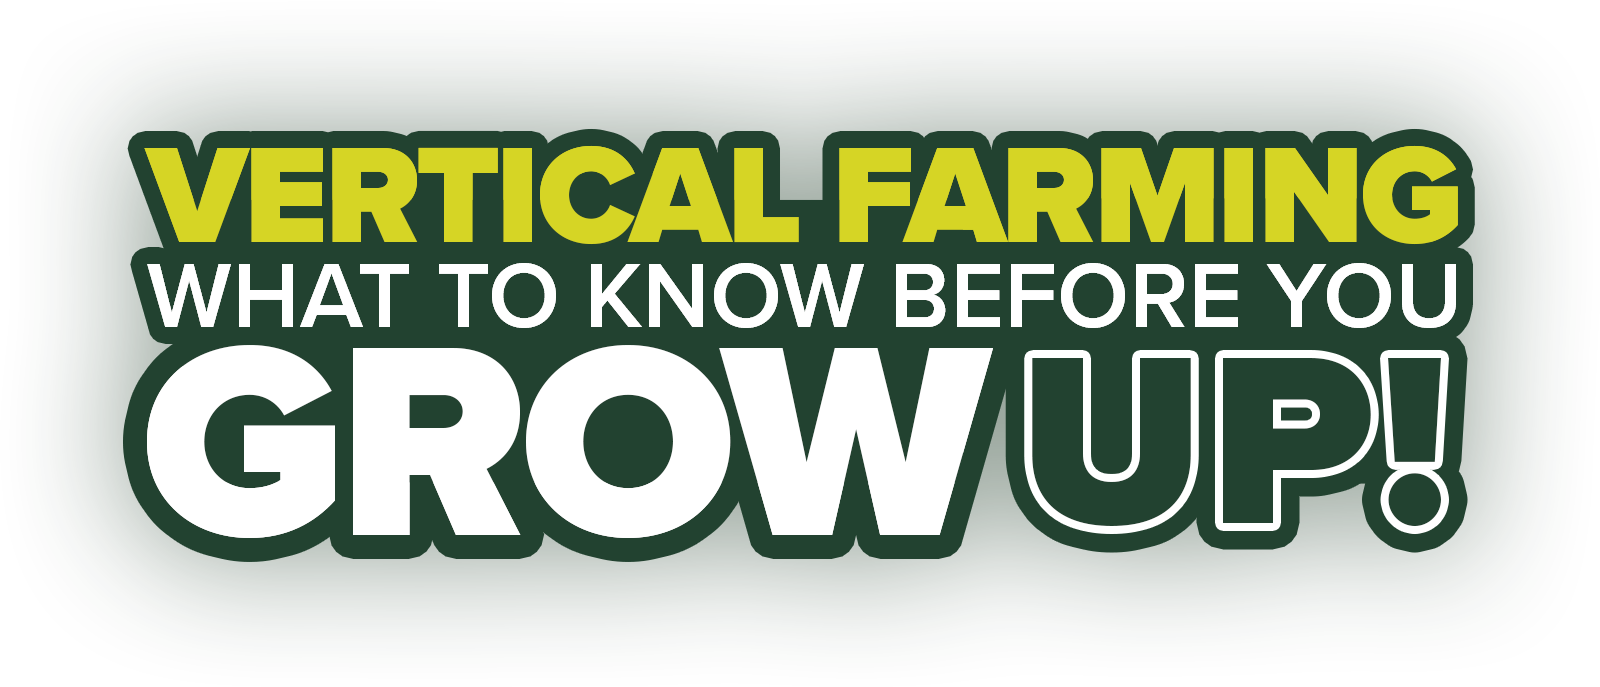 Vertical Farming: What to Know Before You Grow UP!